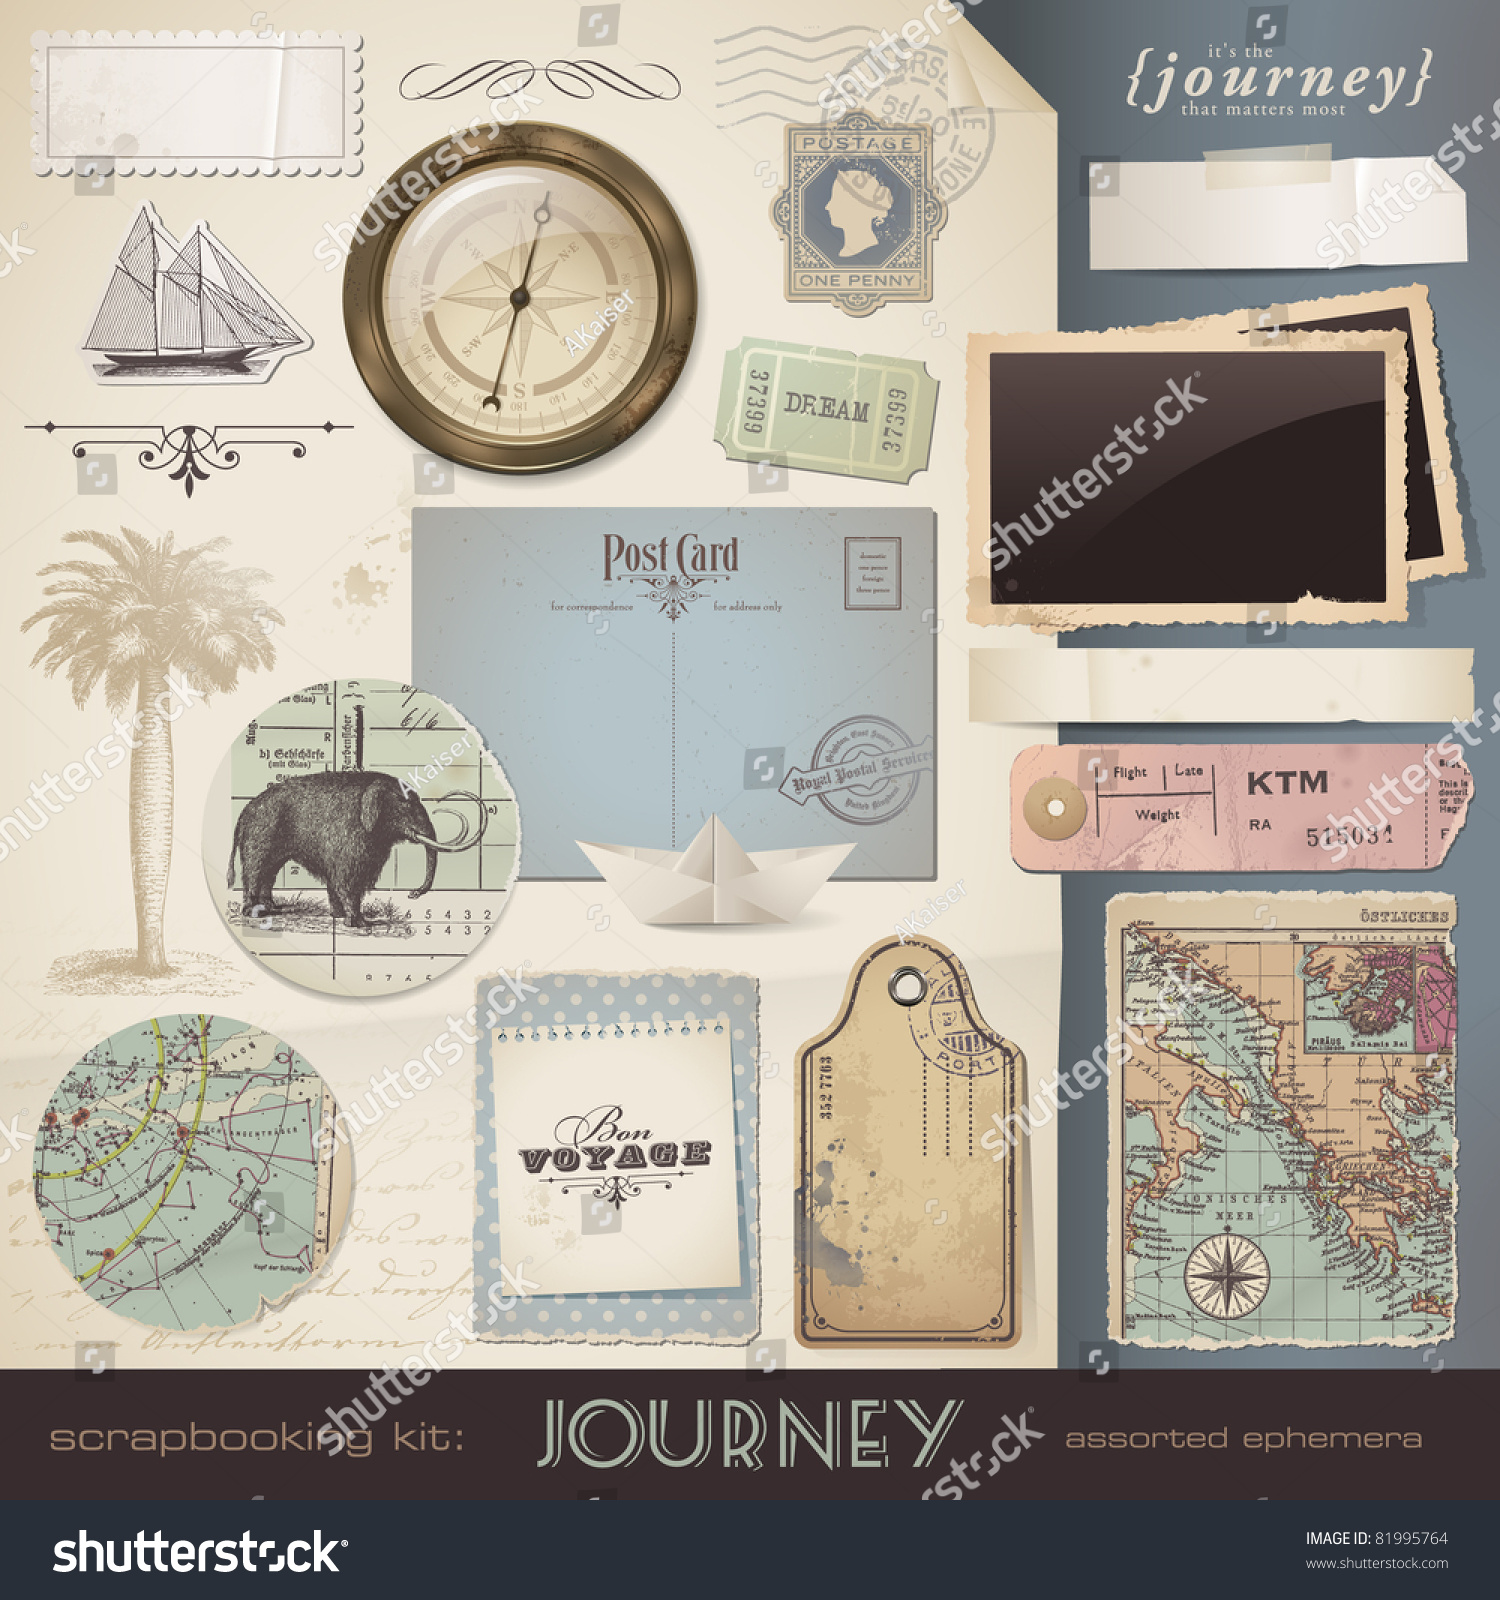 SVG of digital scrapbooking kit: Journey - assorted ephemera and paper objects for your travel and vacation layouts (eps10 file) svg